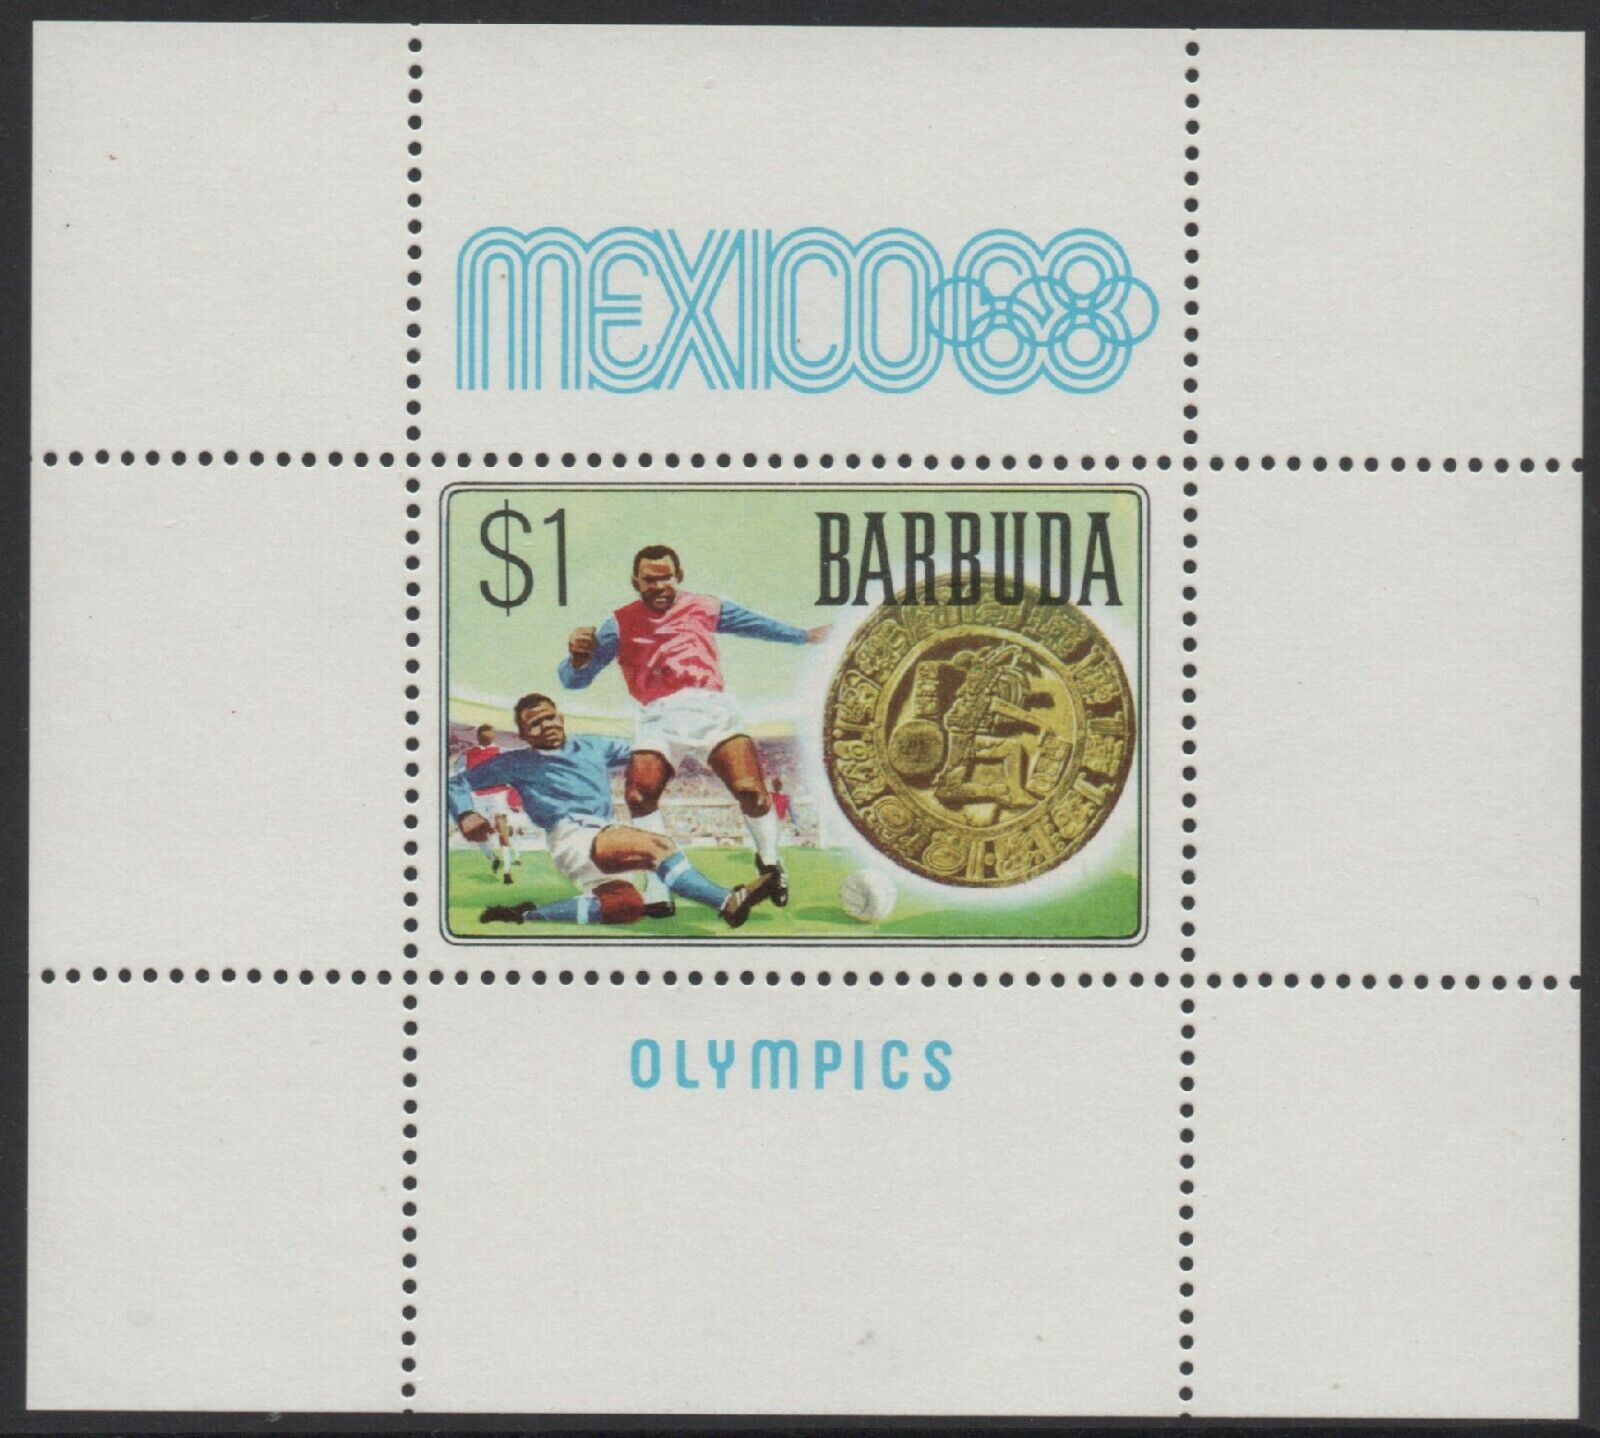 Barbuda 1968 Olympic Games in Over Max 44% OFF item handling MUH Mini Sheet Mexico